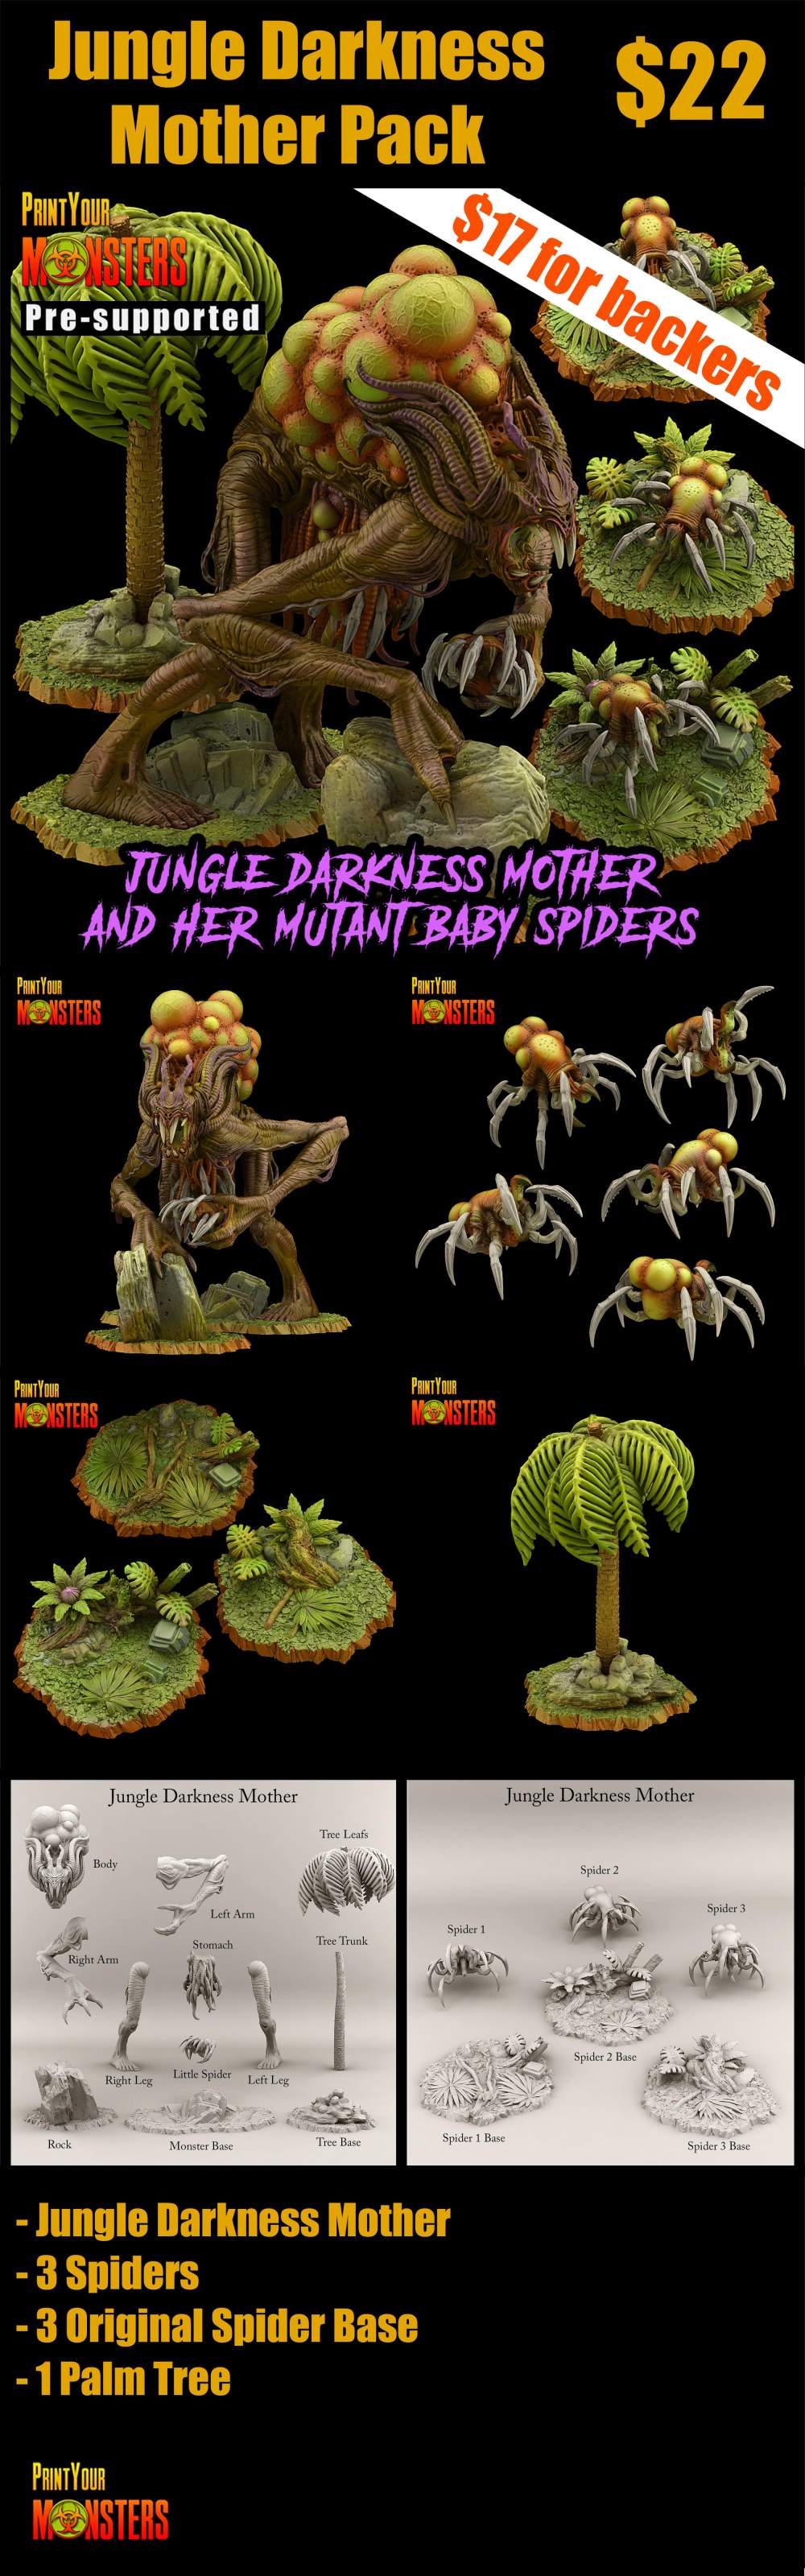 Jungle Darkness Mother Pack